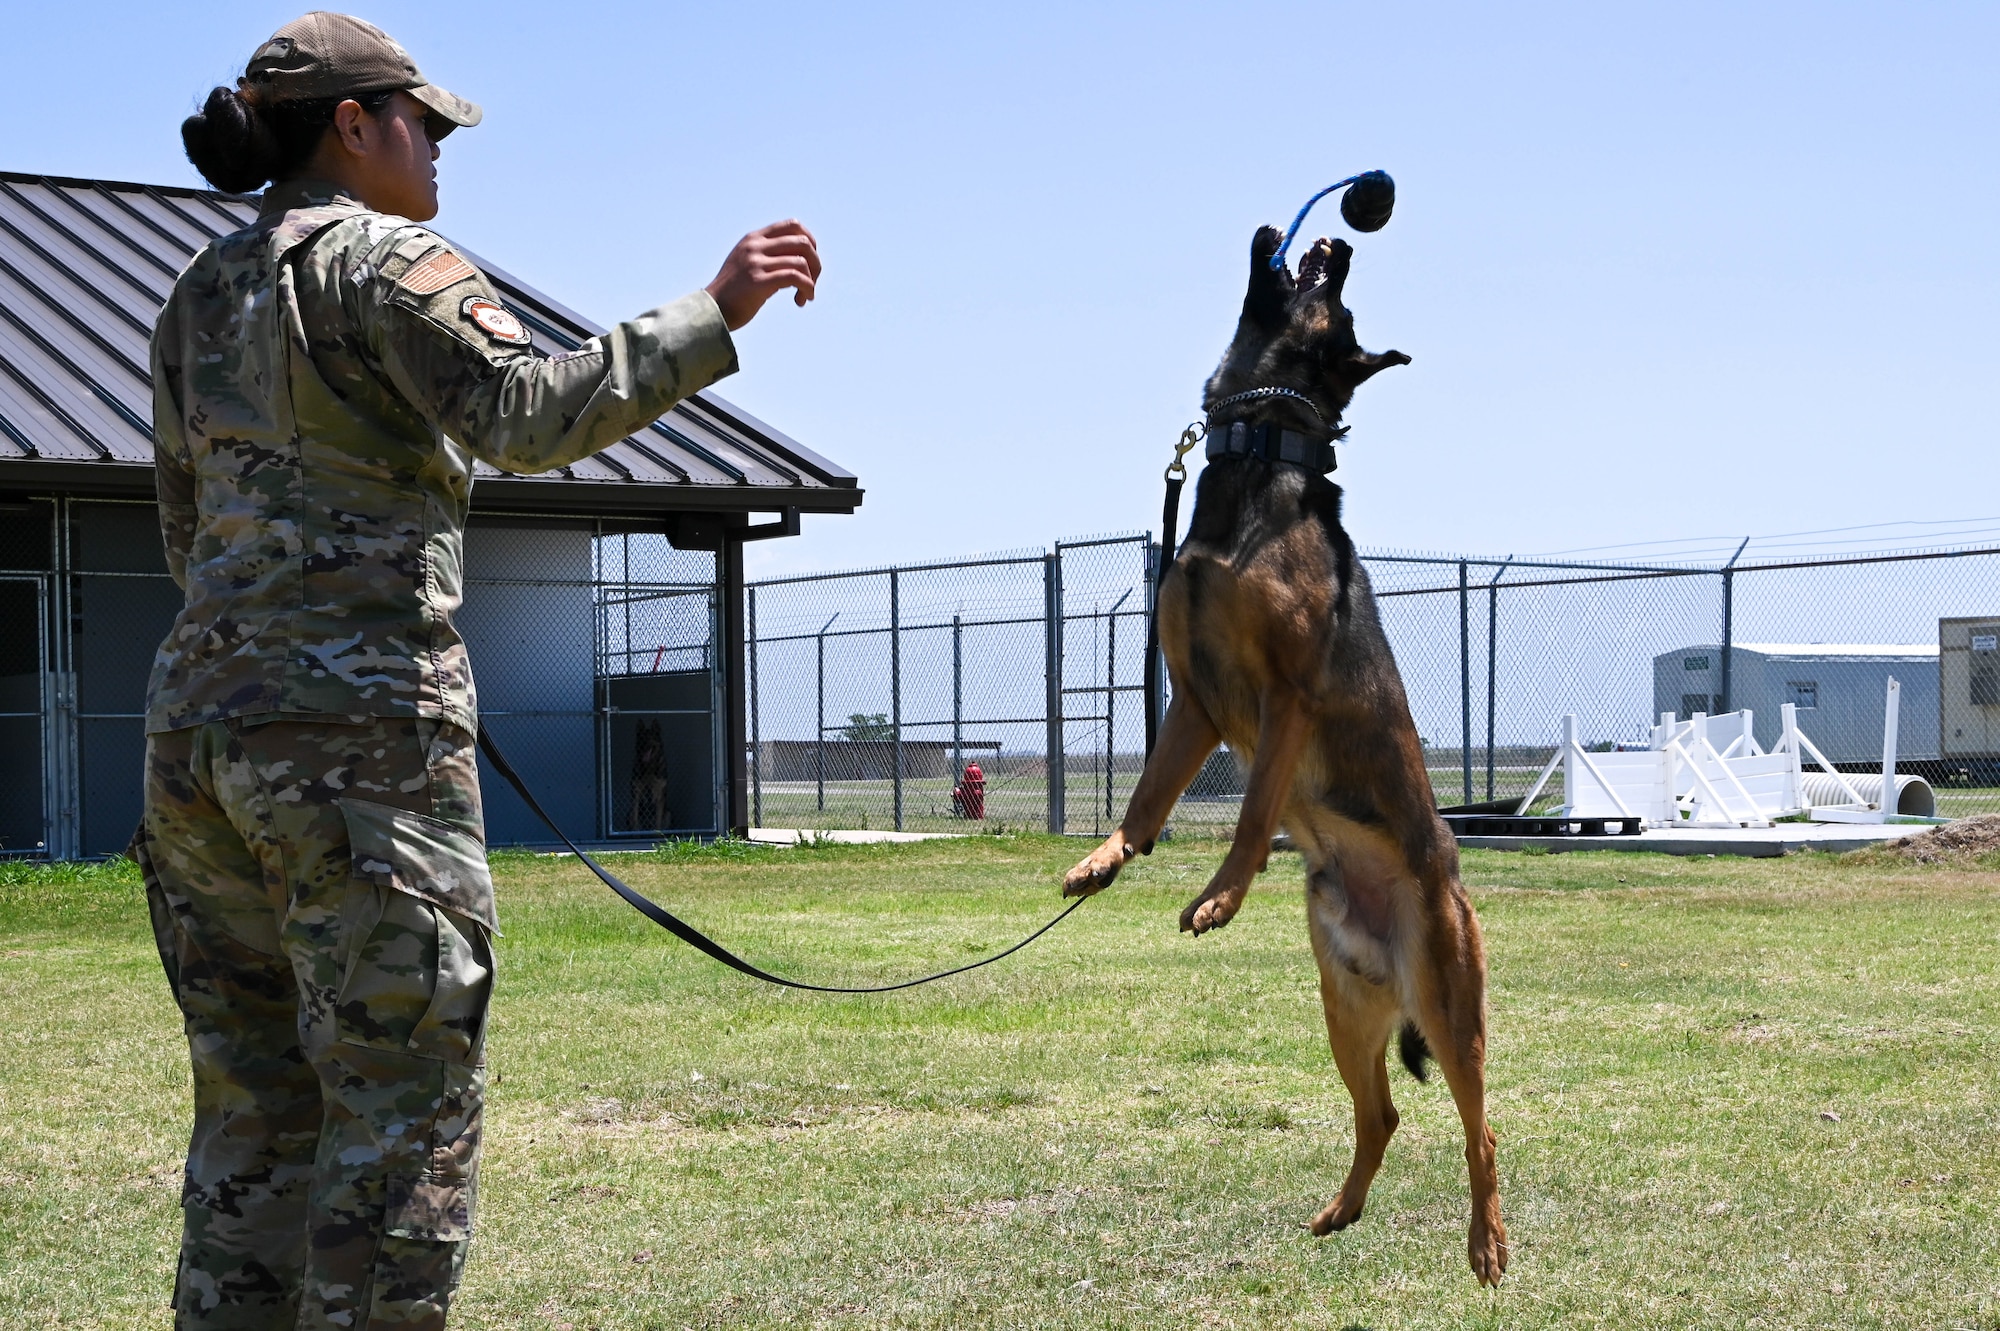 a dog jumps for a toy thrown by it's handler